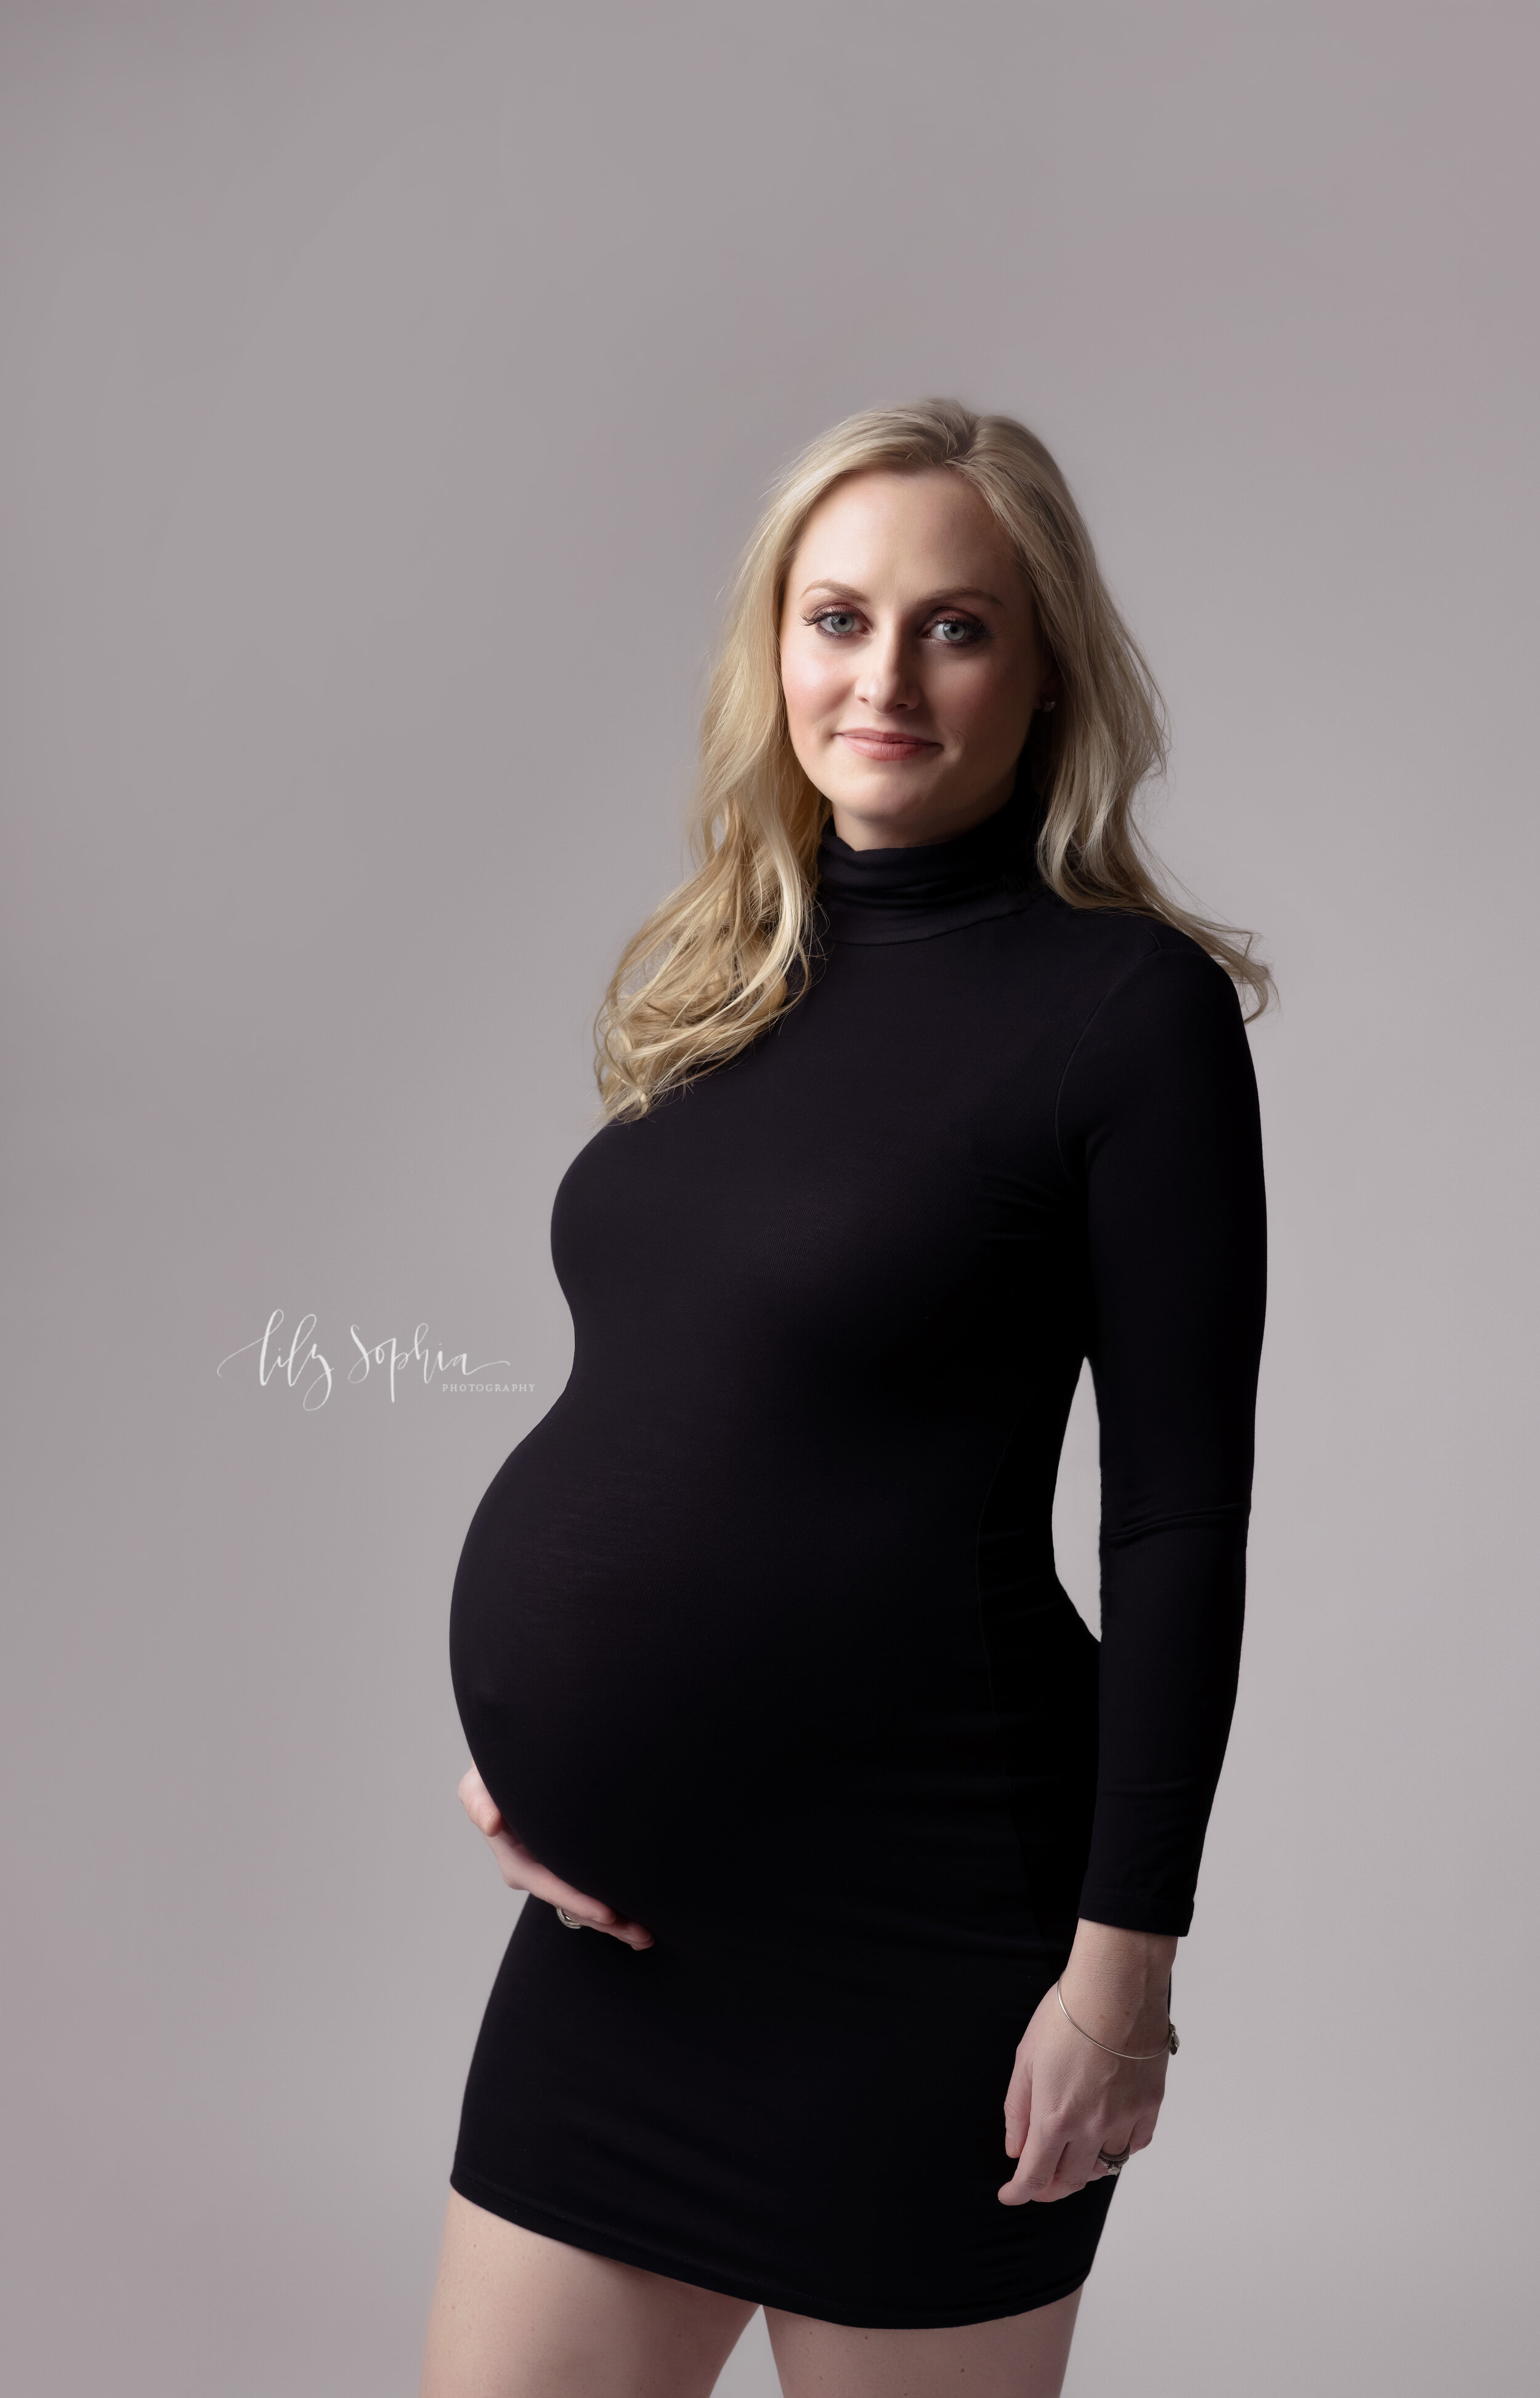  Color  editorial maternity fine art image of beautiful smiling pregnant woman with long blonde hair dressed in black turtleneck bodycon dress on a gray background in the Atlanta studio of Lily Sophia Photography.  